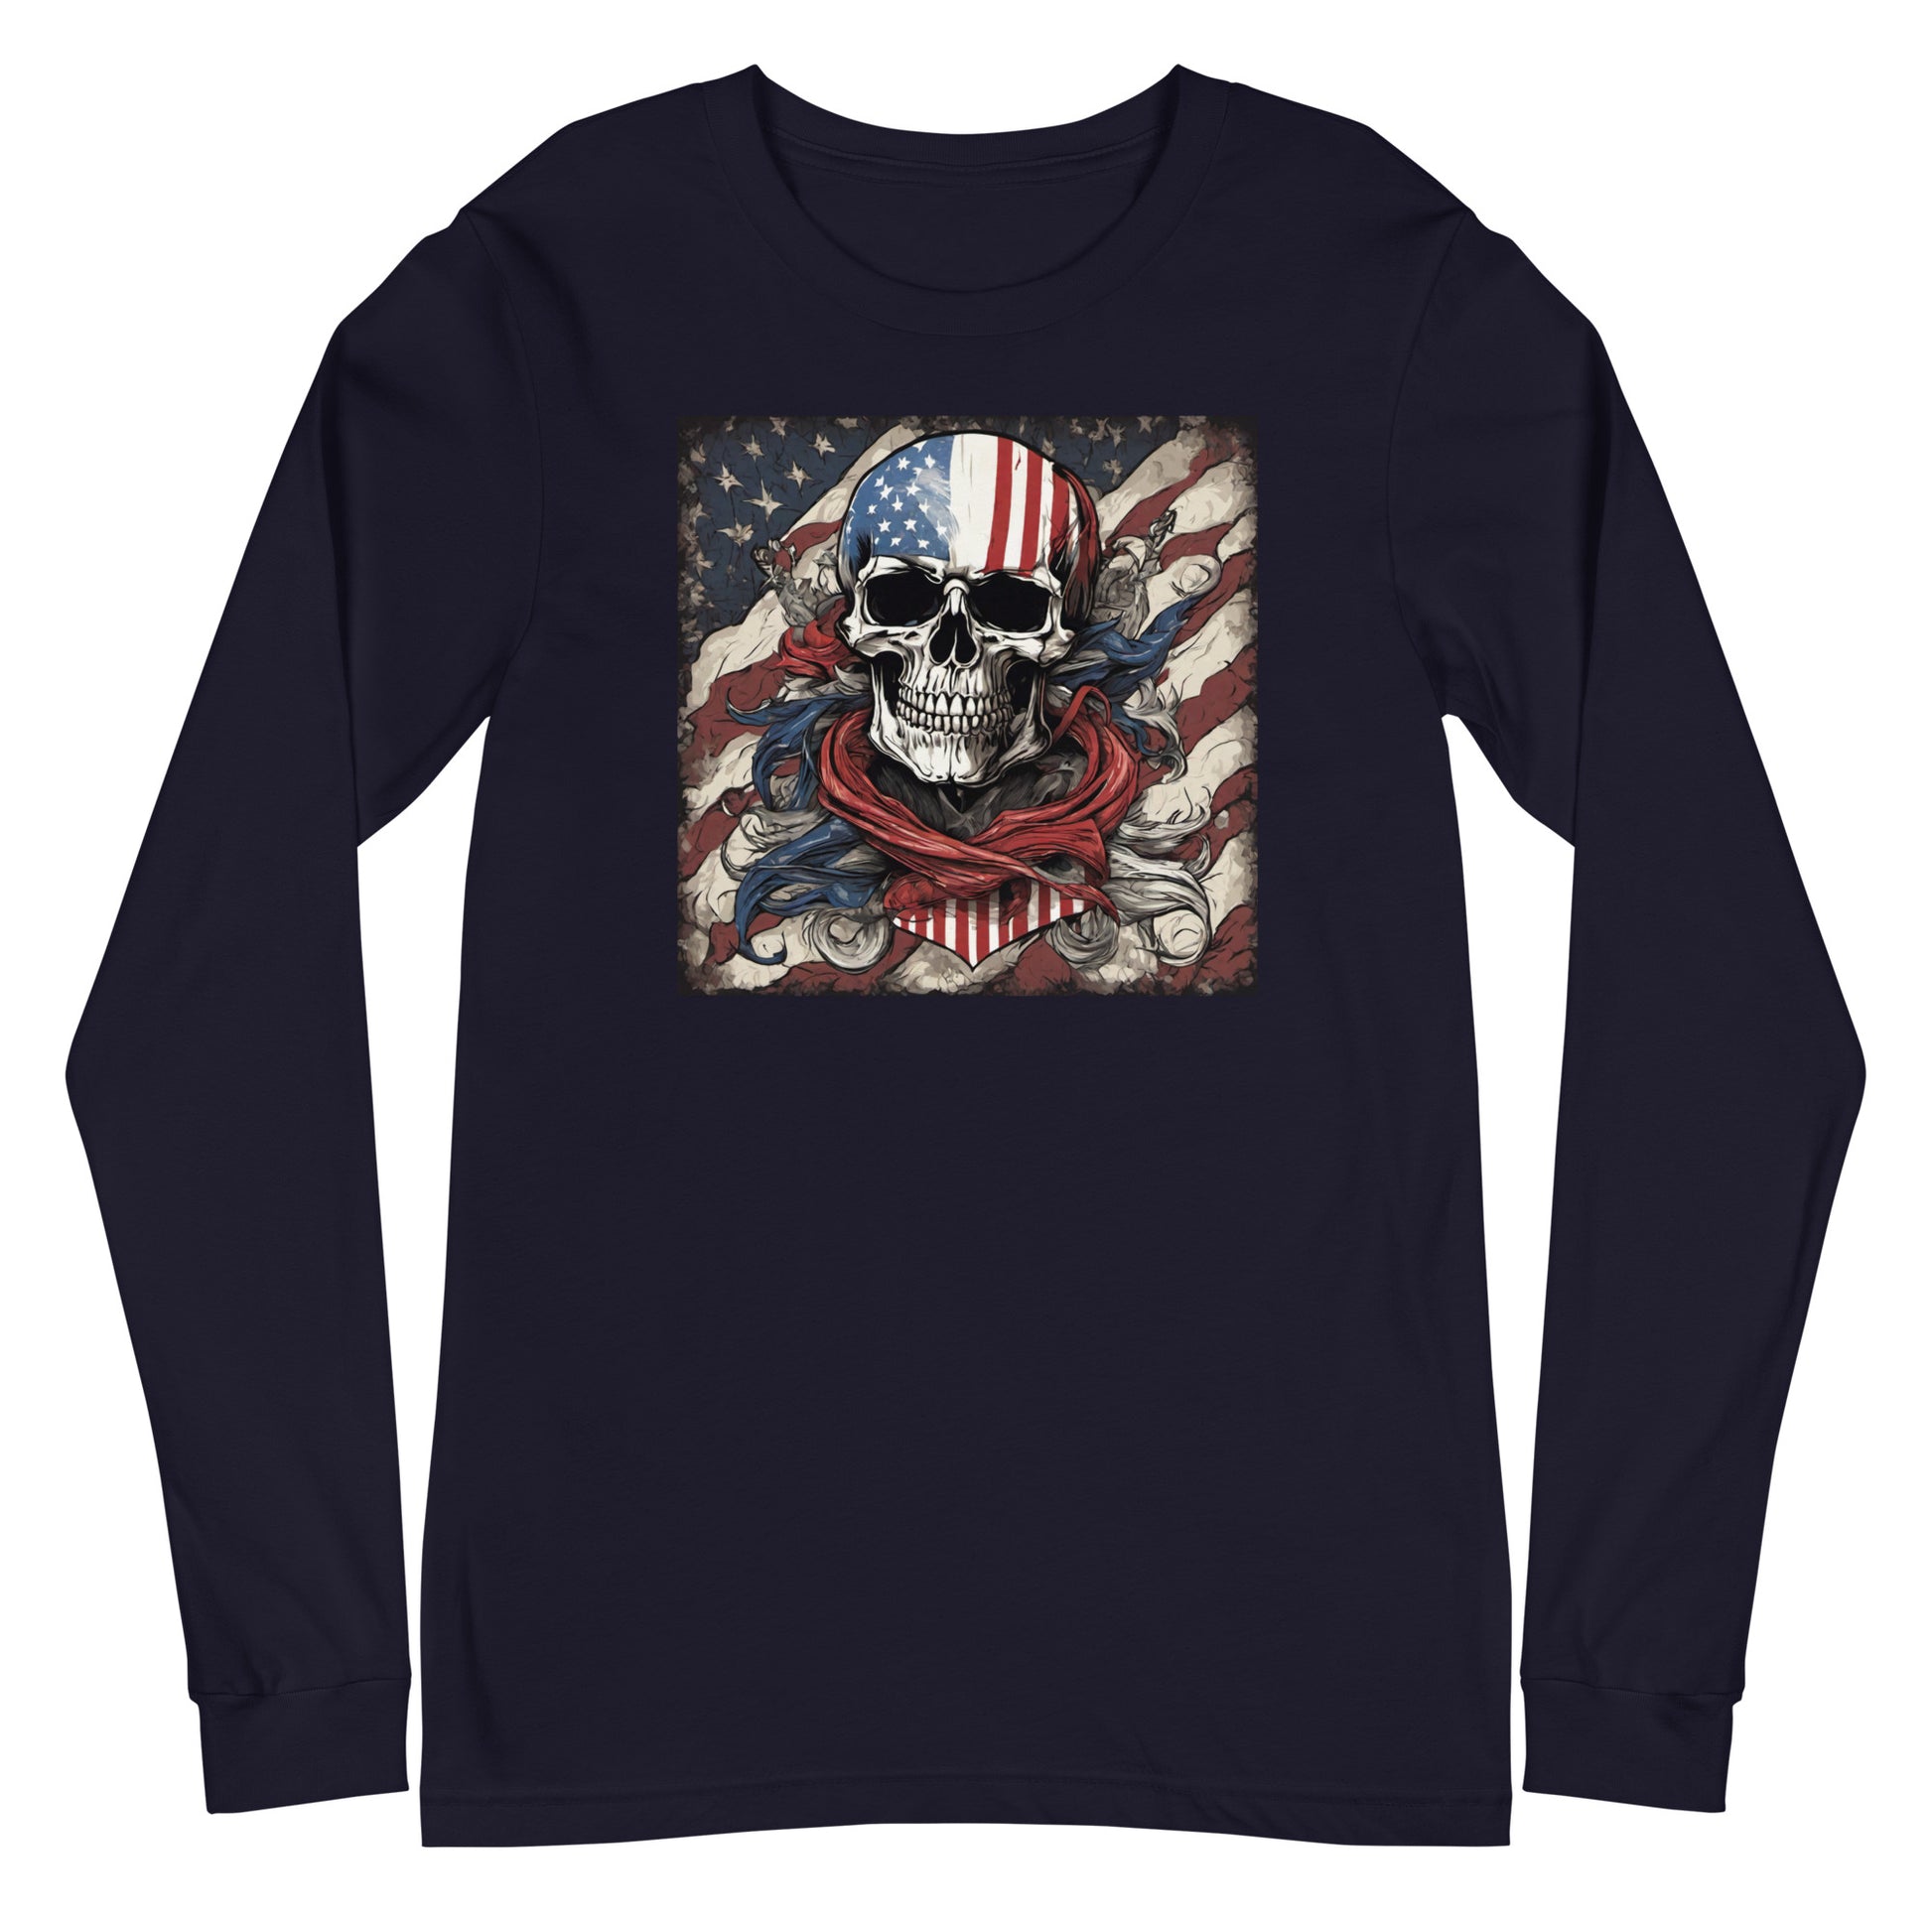 Red, White, & Blue Swashbuckler Long Sleeve Tee Navy